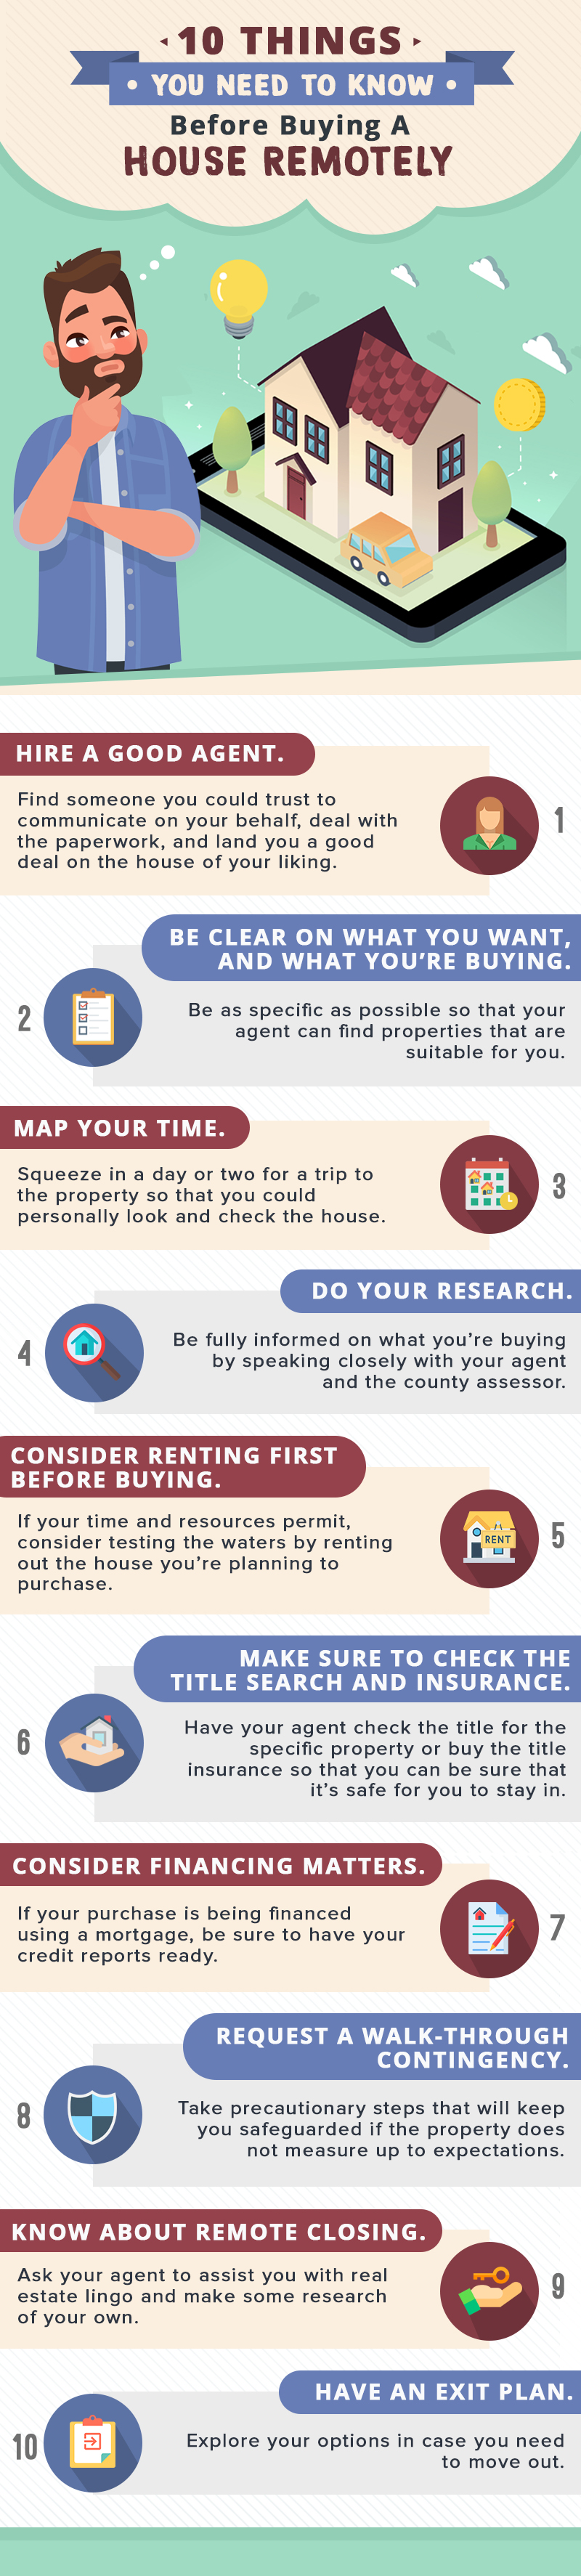 what you need to do before buying a house